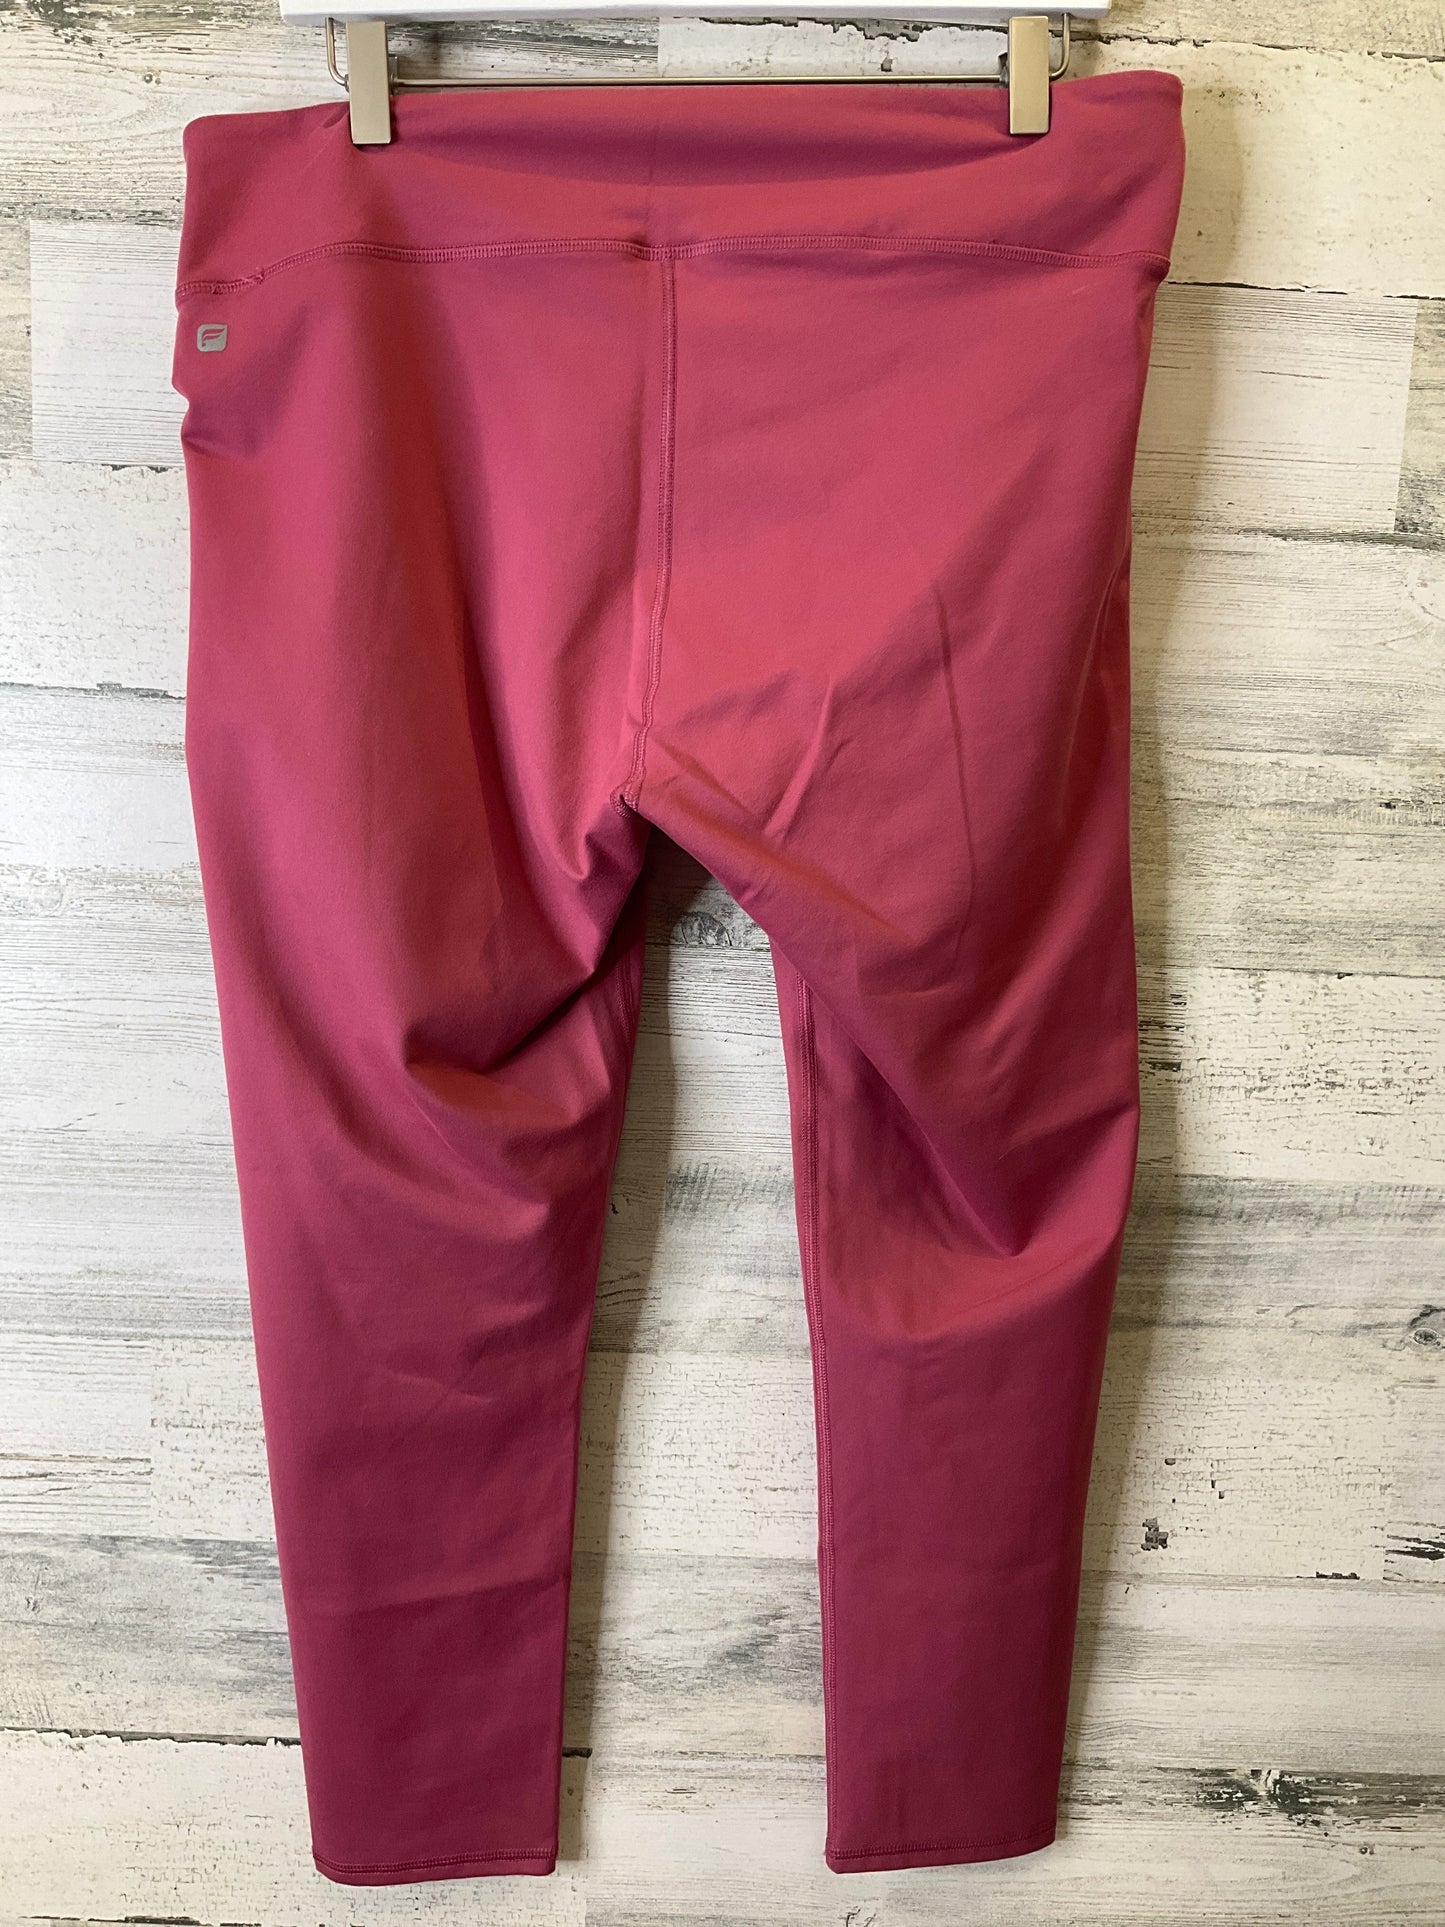 Athletic Leggings By Fabletics  Size: Xxl